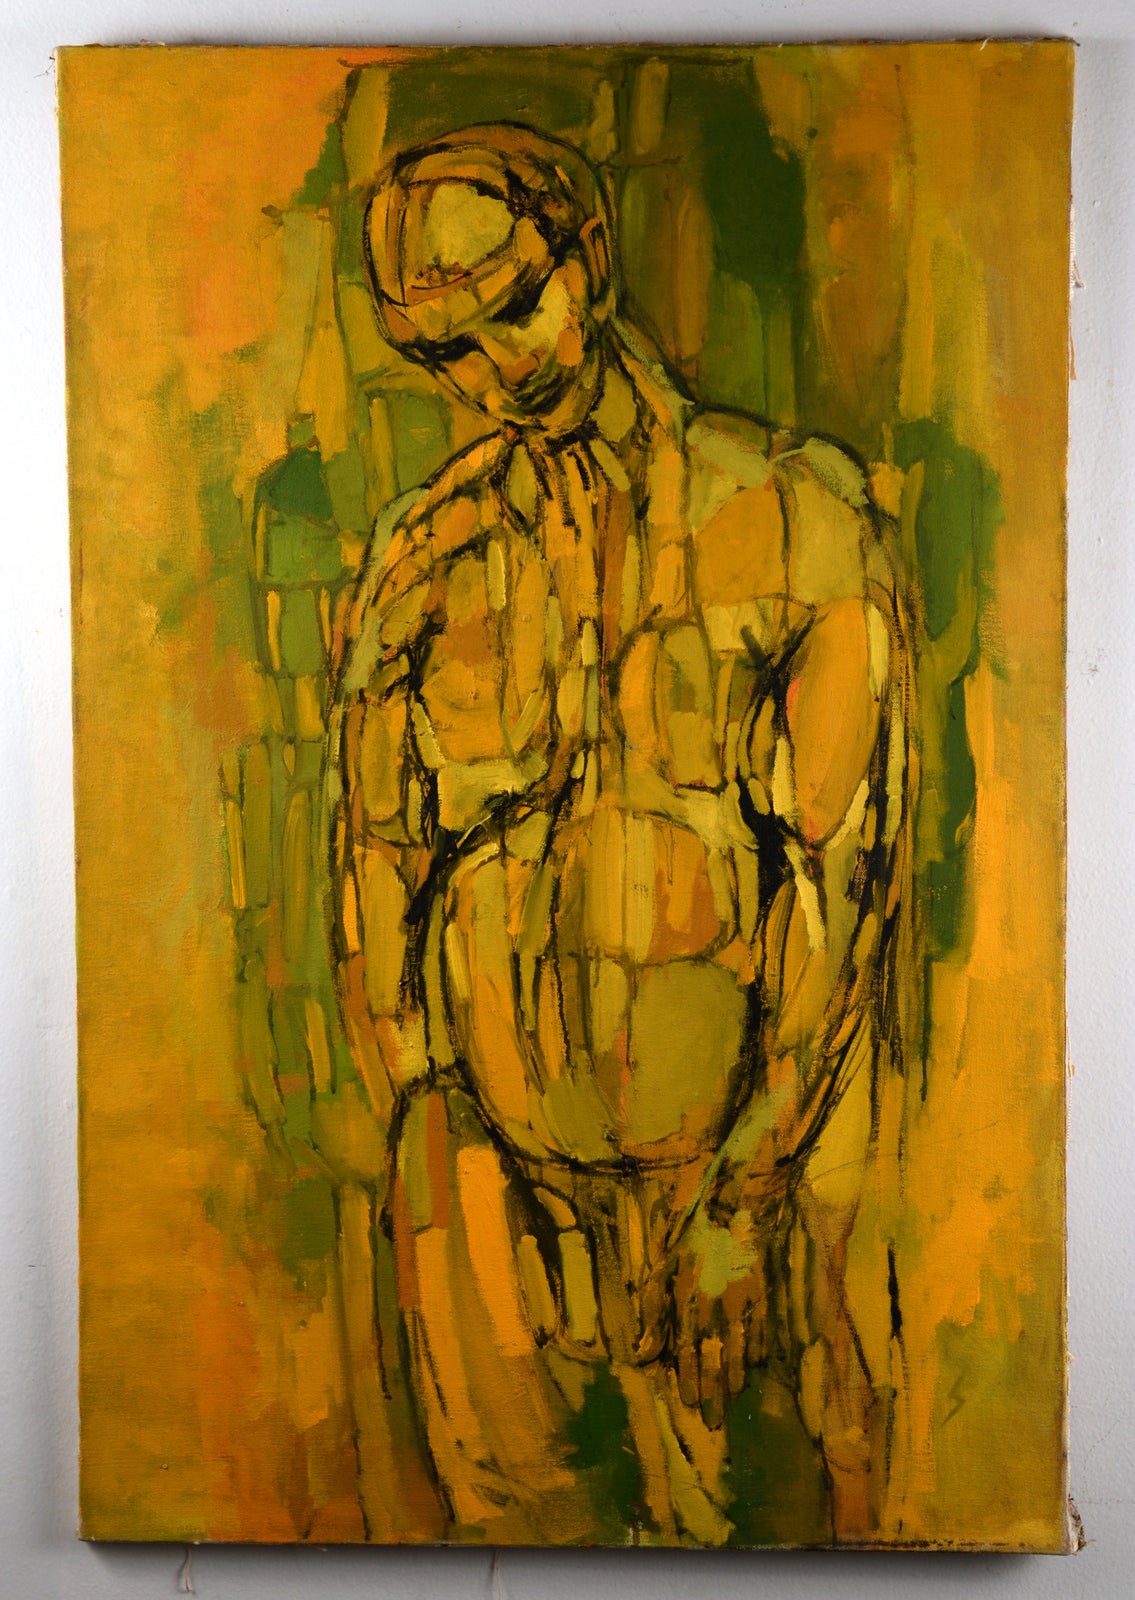 Stylized naked male nude painting in bold yellows and greens. The intense color palette and bold geometric shapes help to accentuate the well-developed muscular form. The back of the painting is signed 